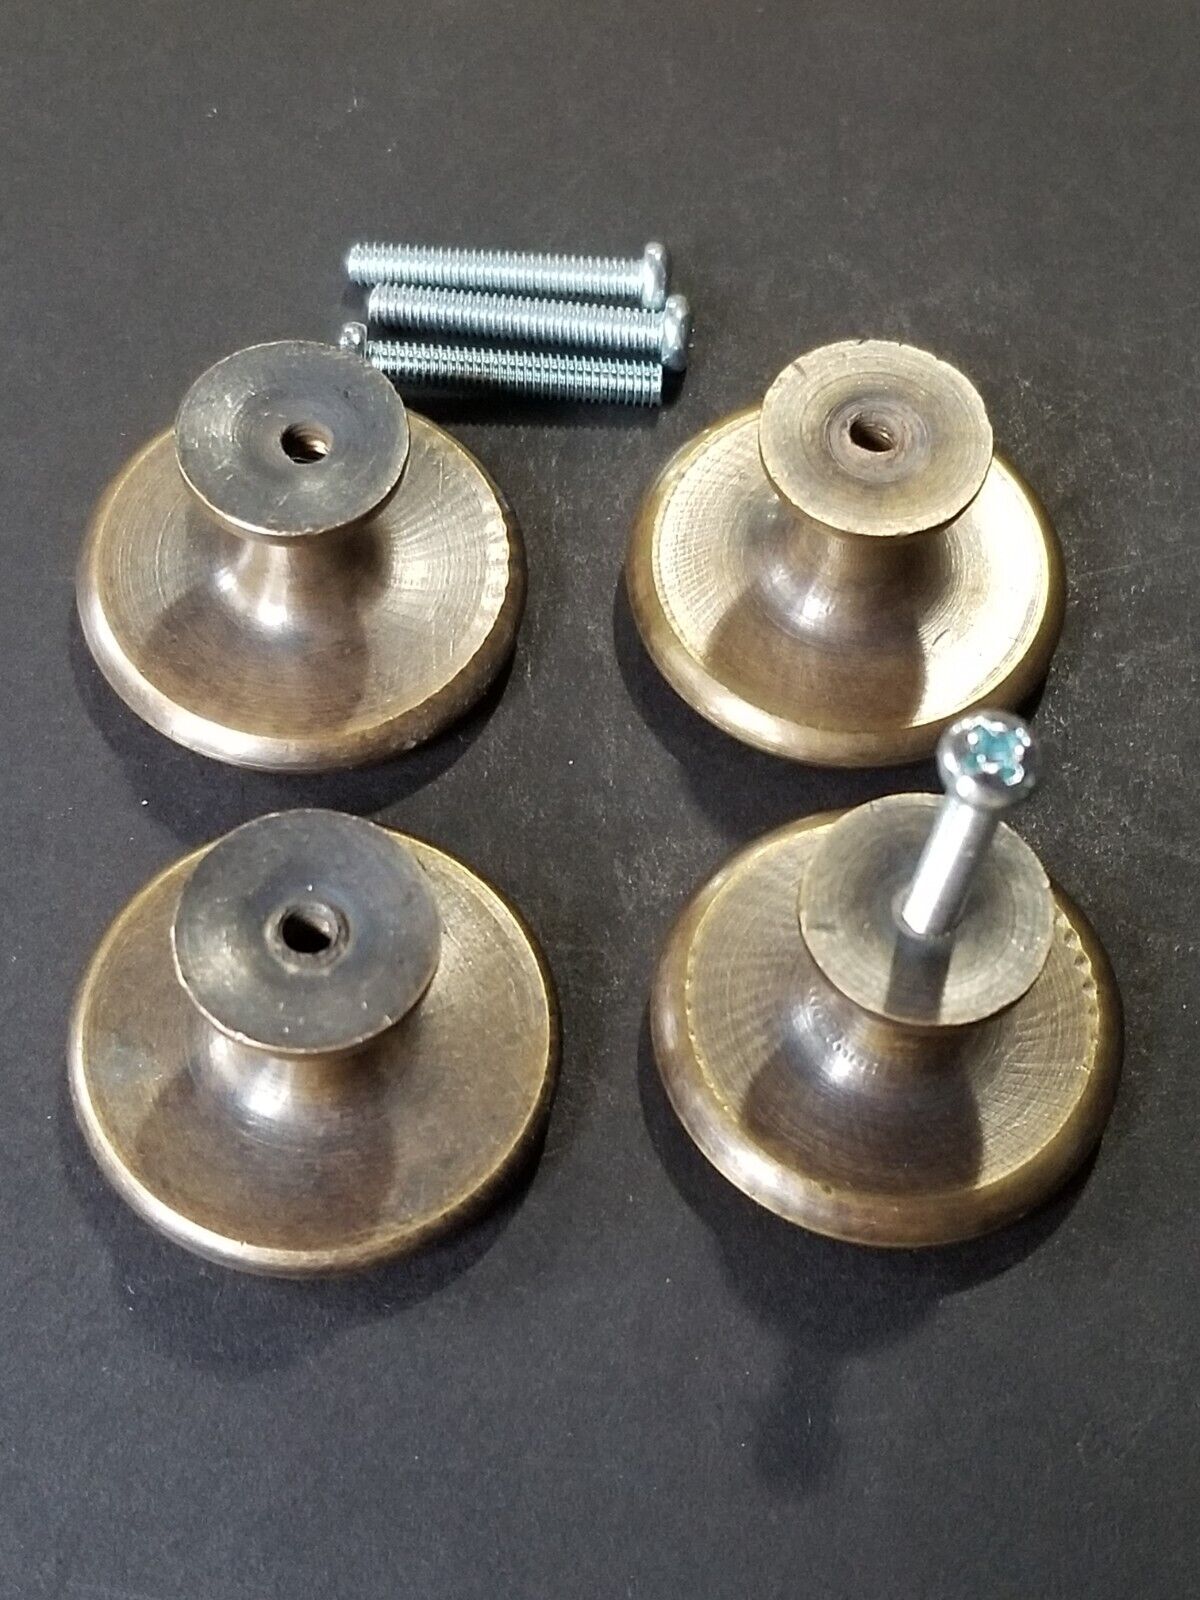 4 x Solid Brass Cabinet Cupboard Drawer Round Knobs Pull Handle 1-3/8" dia. #K27